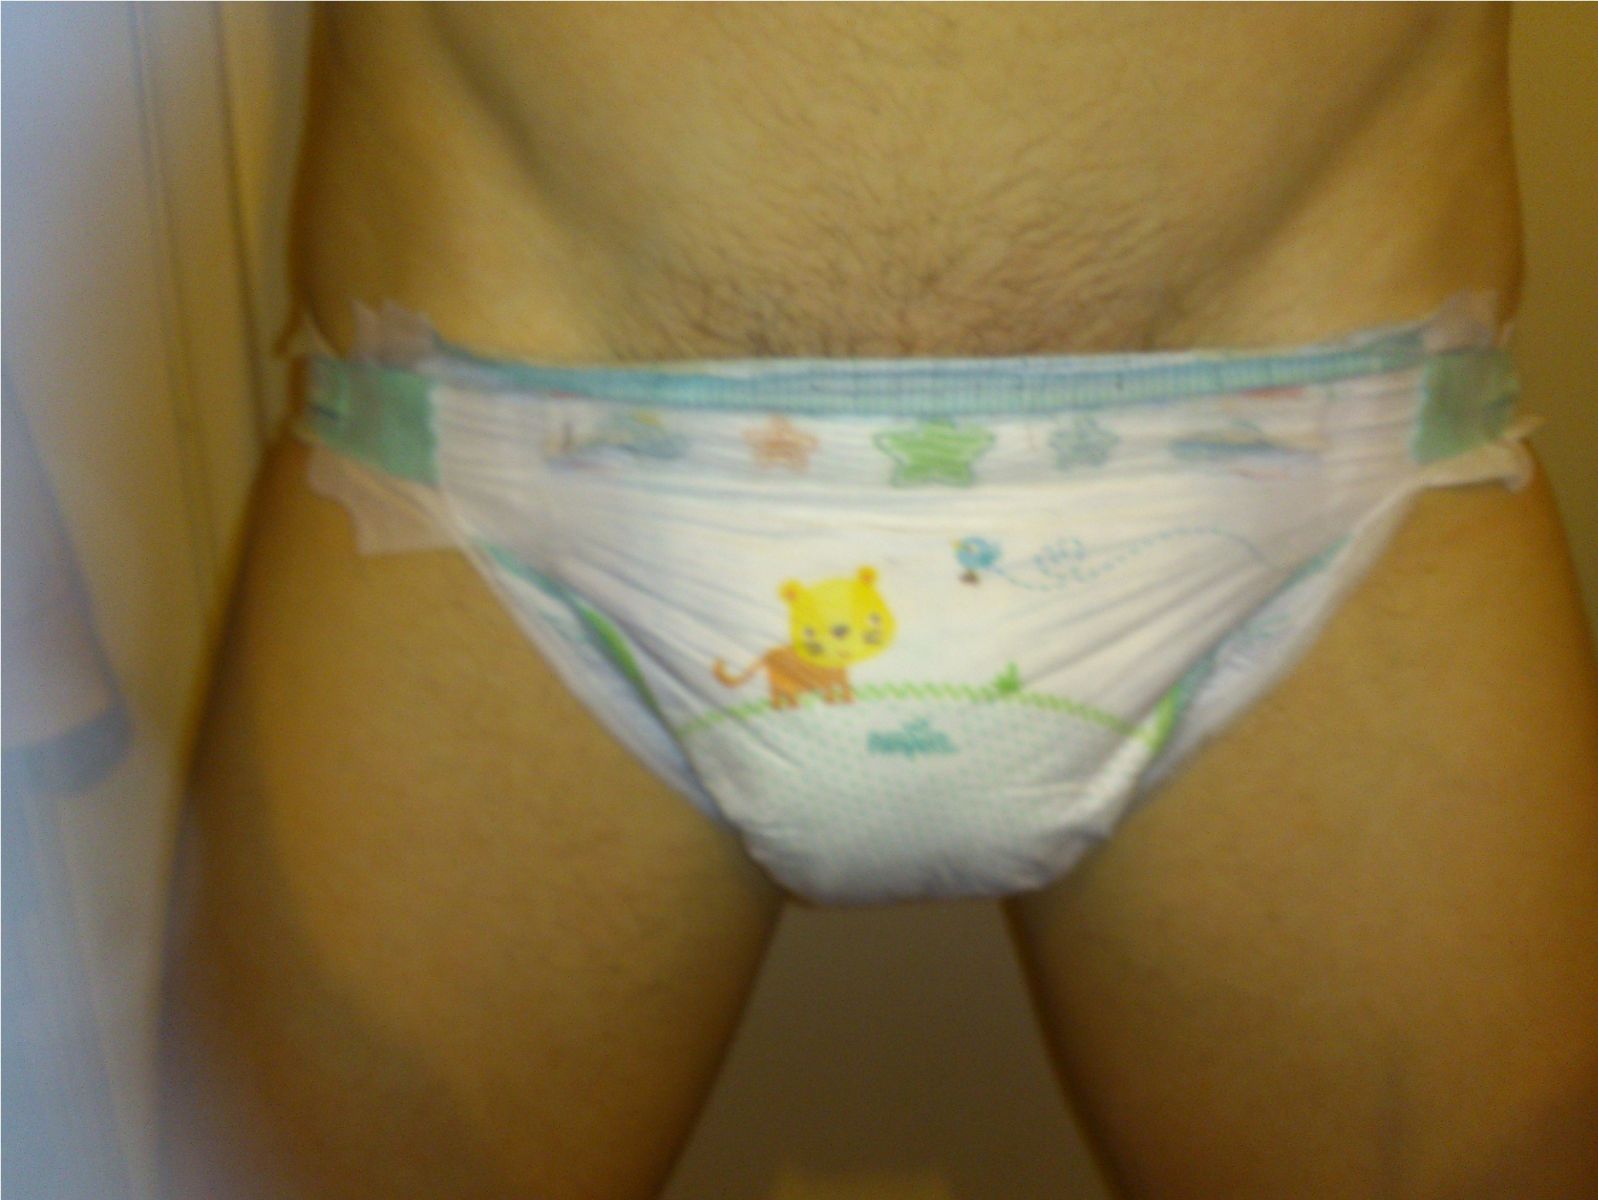 pampers 6 adult